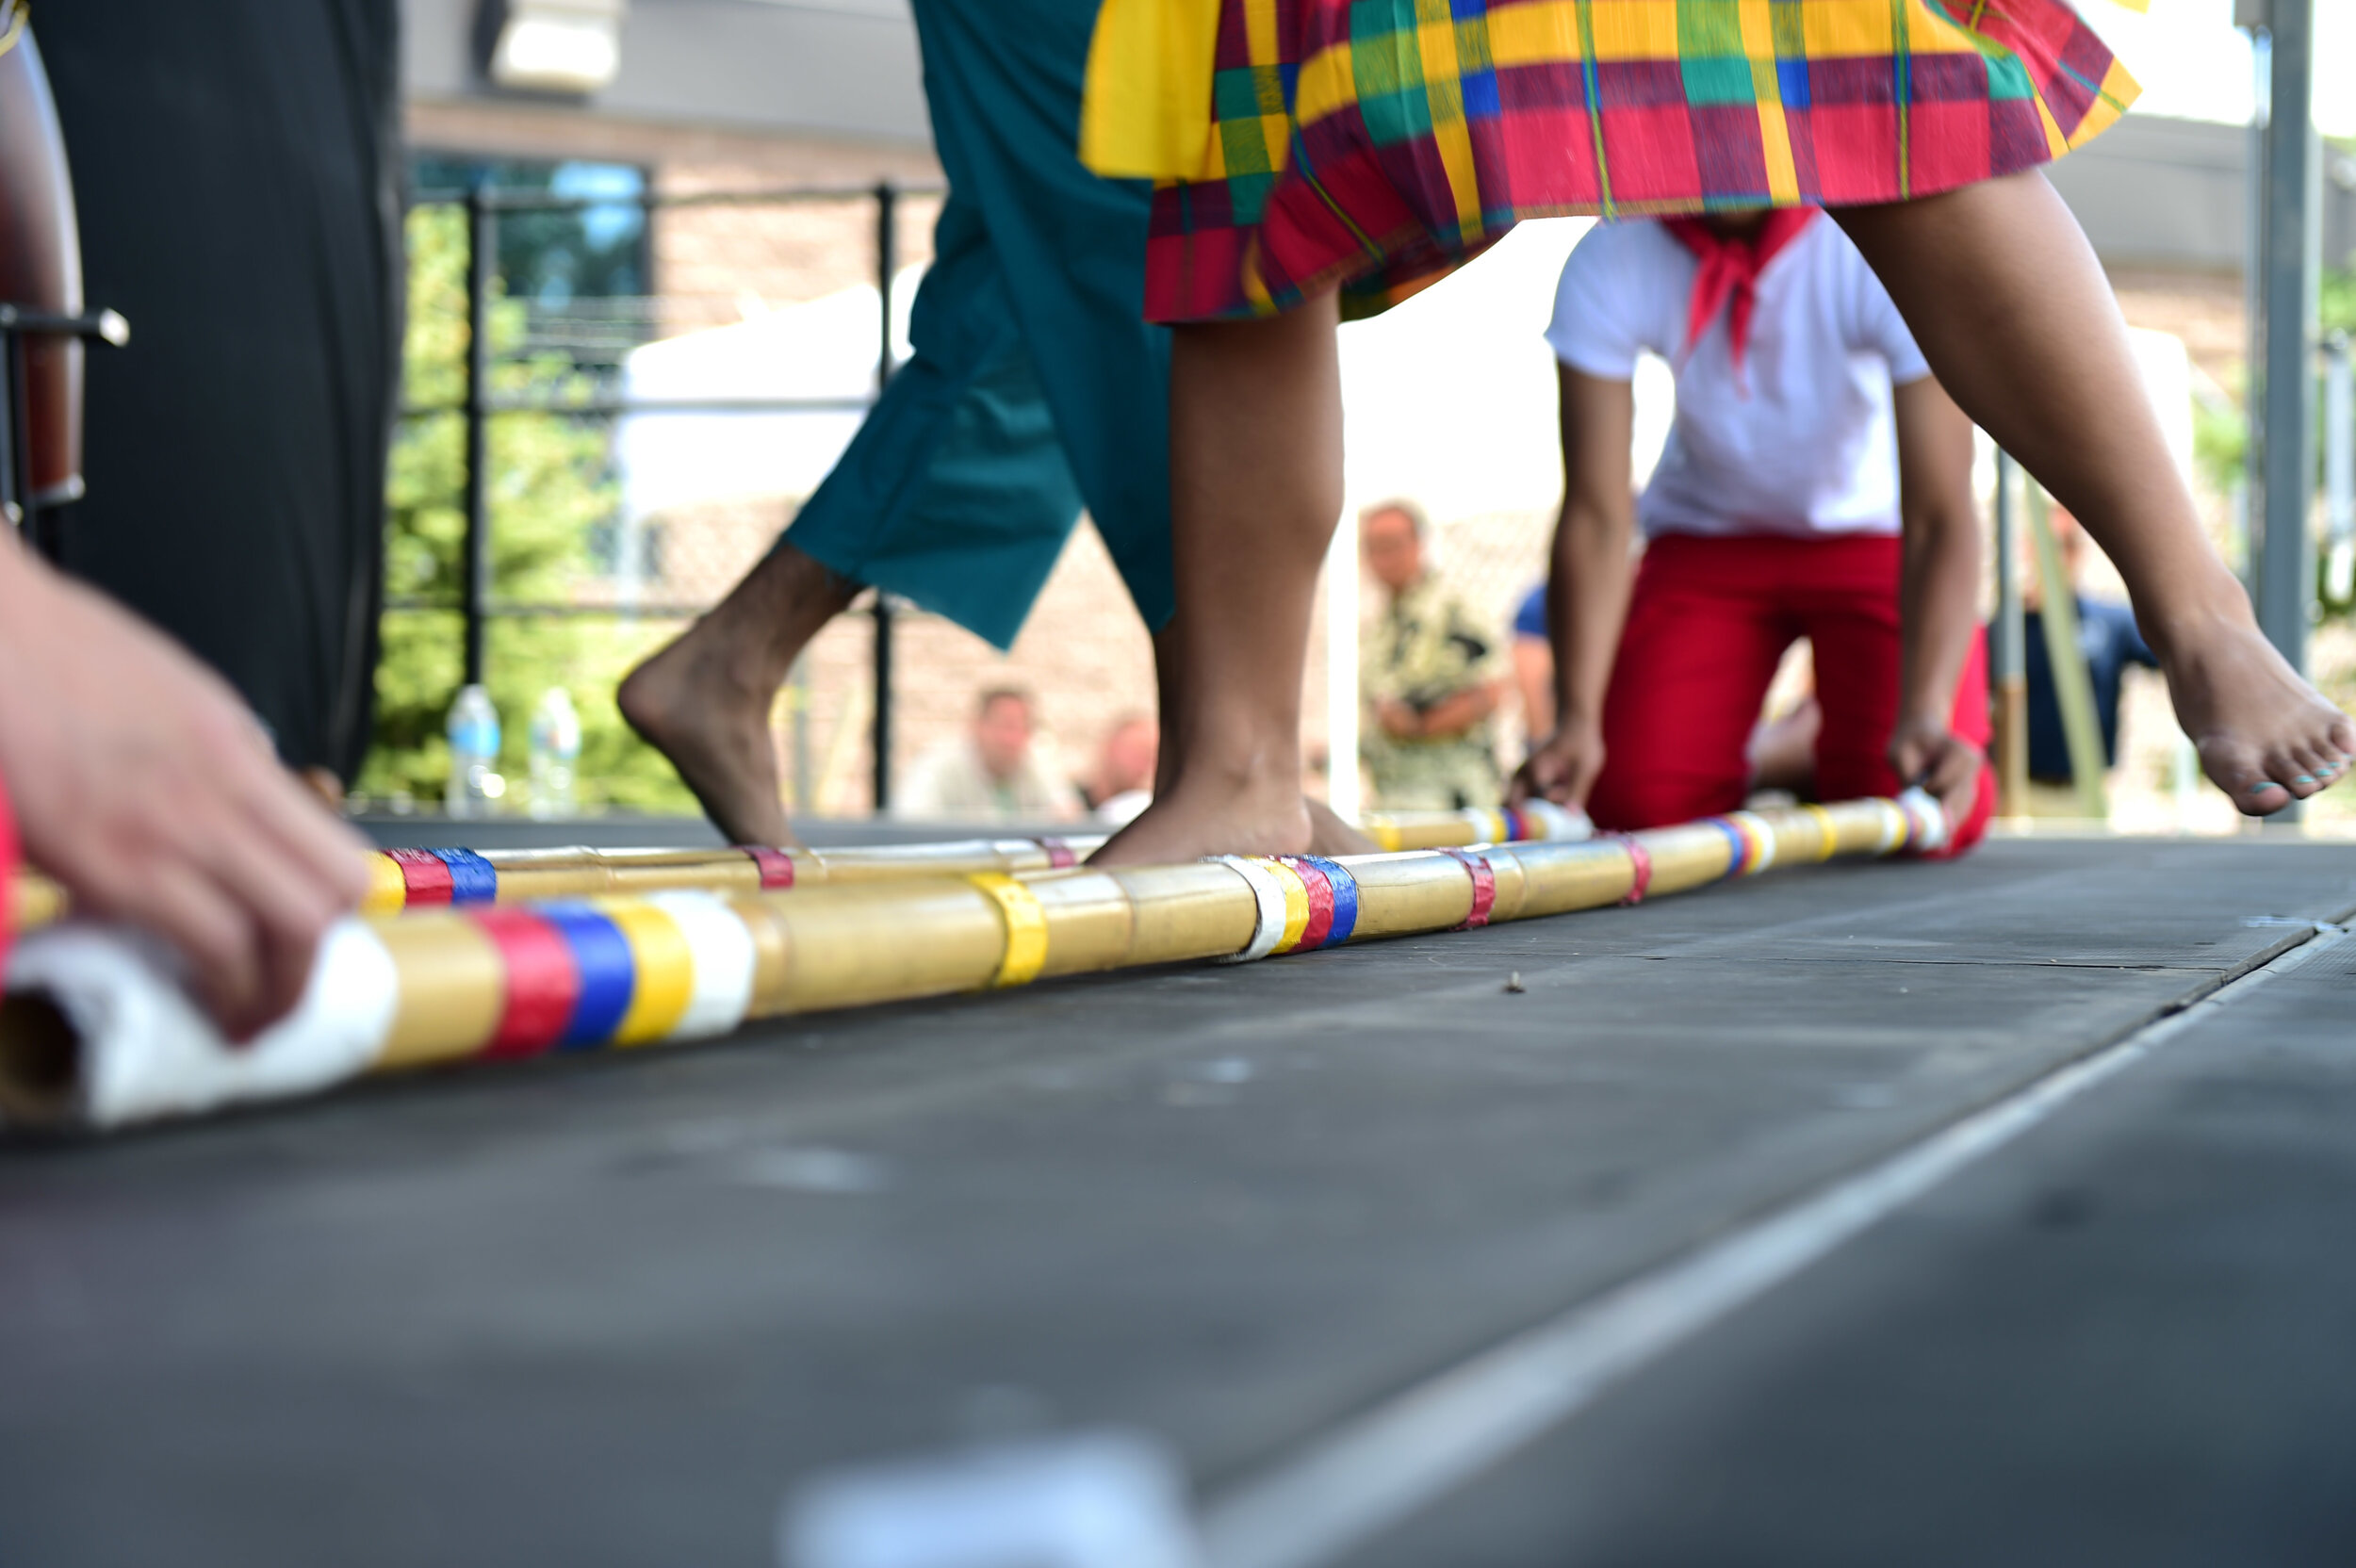 Watch your ankles if you dance the "Tinikling"